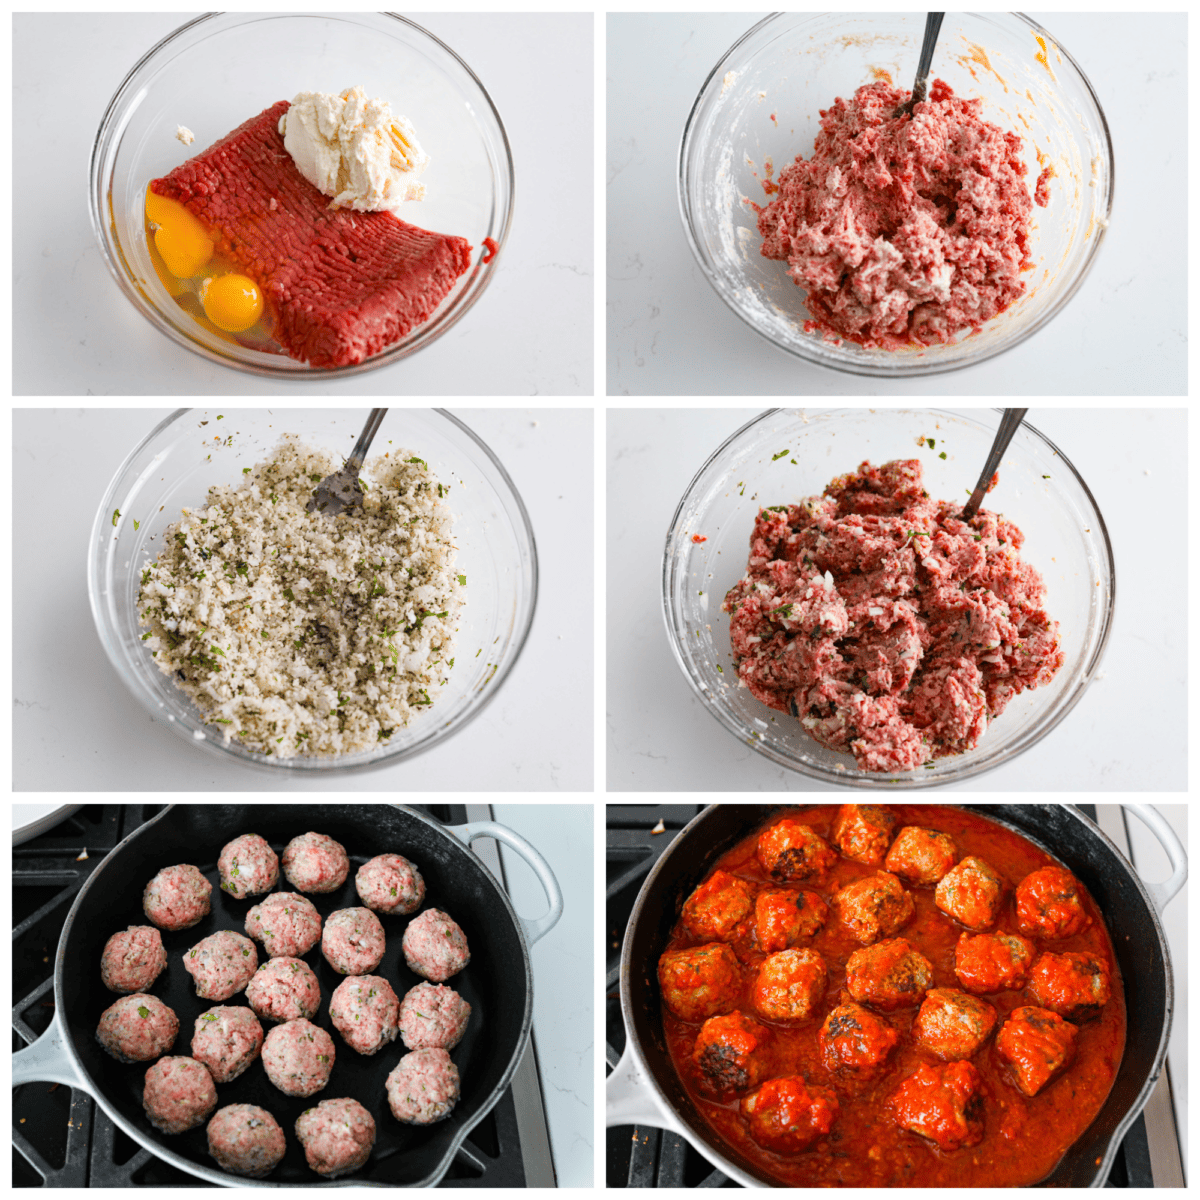 First photo of meat, ricotta, and eggs in a bowl. Second photo meat mixture combined. Third photo of the breadcrumb mixture combined. Fourth photo of meat and breadcrumb mixture combined. Fifth photo of meatballs browning in a skillet. Sixth photo of meatballs in a skillet with marinara sauce. 